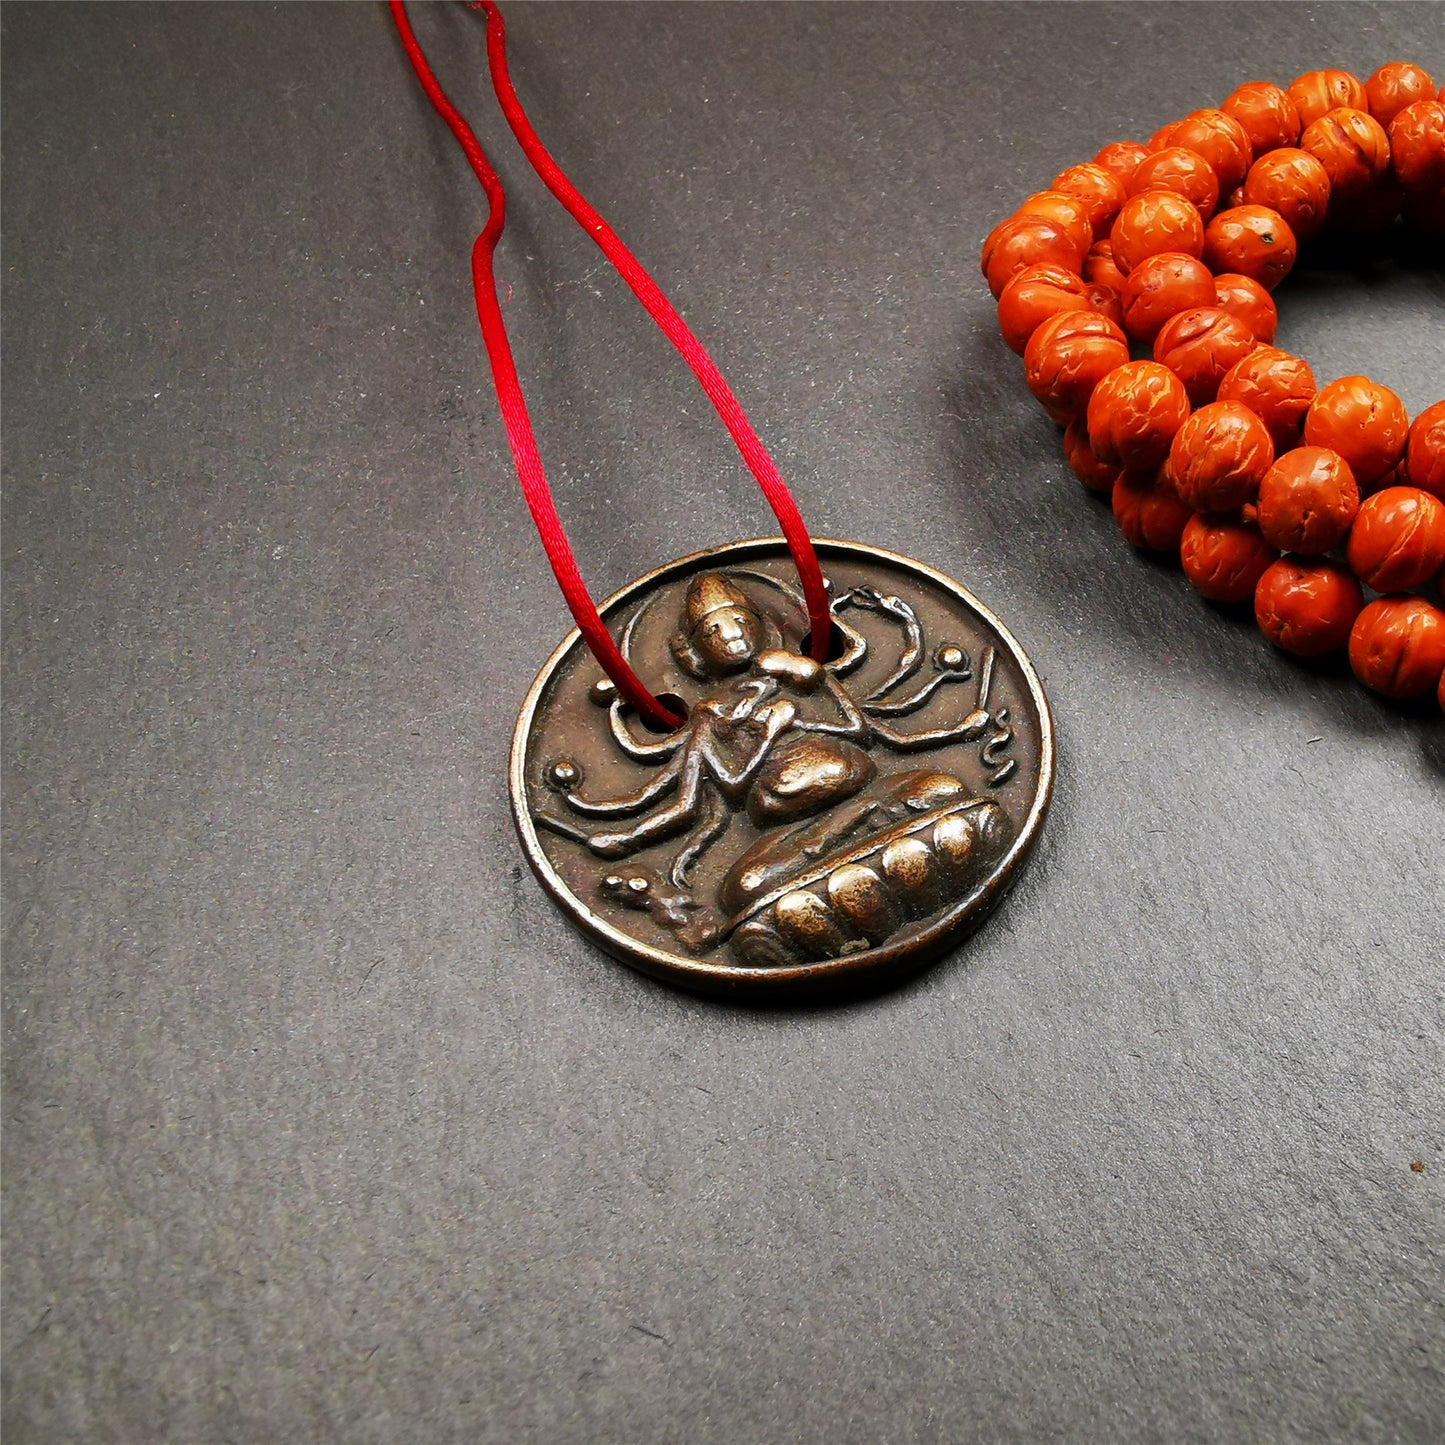 This Usnisa Vijaya statue was collected from Derge,Tibet. It's a badge or pendant,made of copper,brown color, 1.4 inch diameter. You can make it into a necklace,or bag hanging,or just put into your shrine.